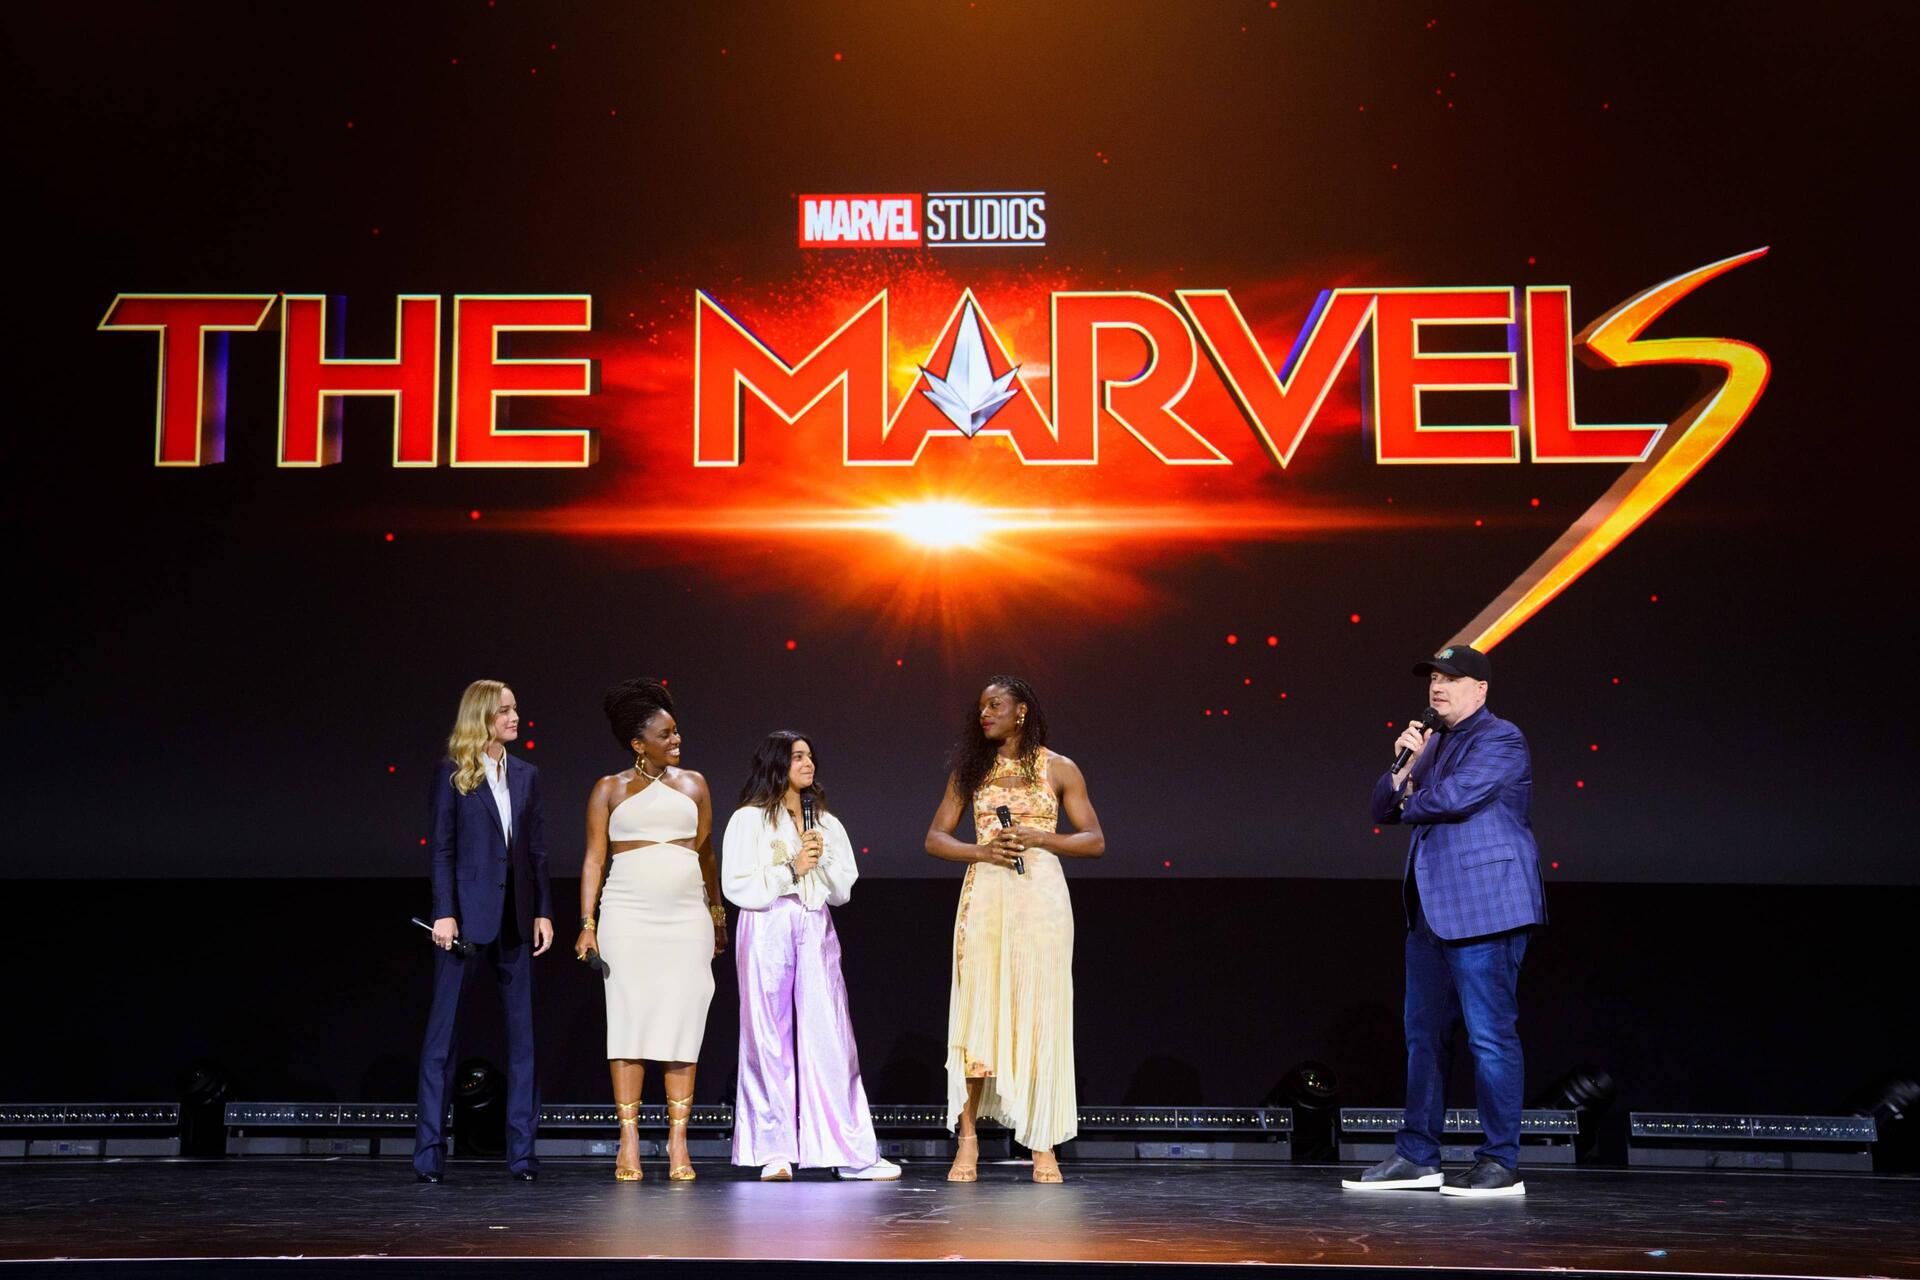 The Marvels Cast with Kevin Fegie